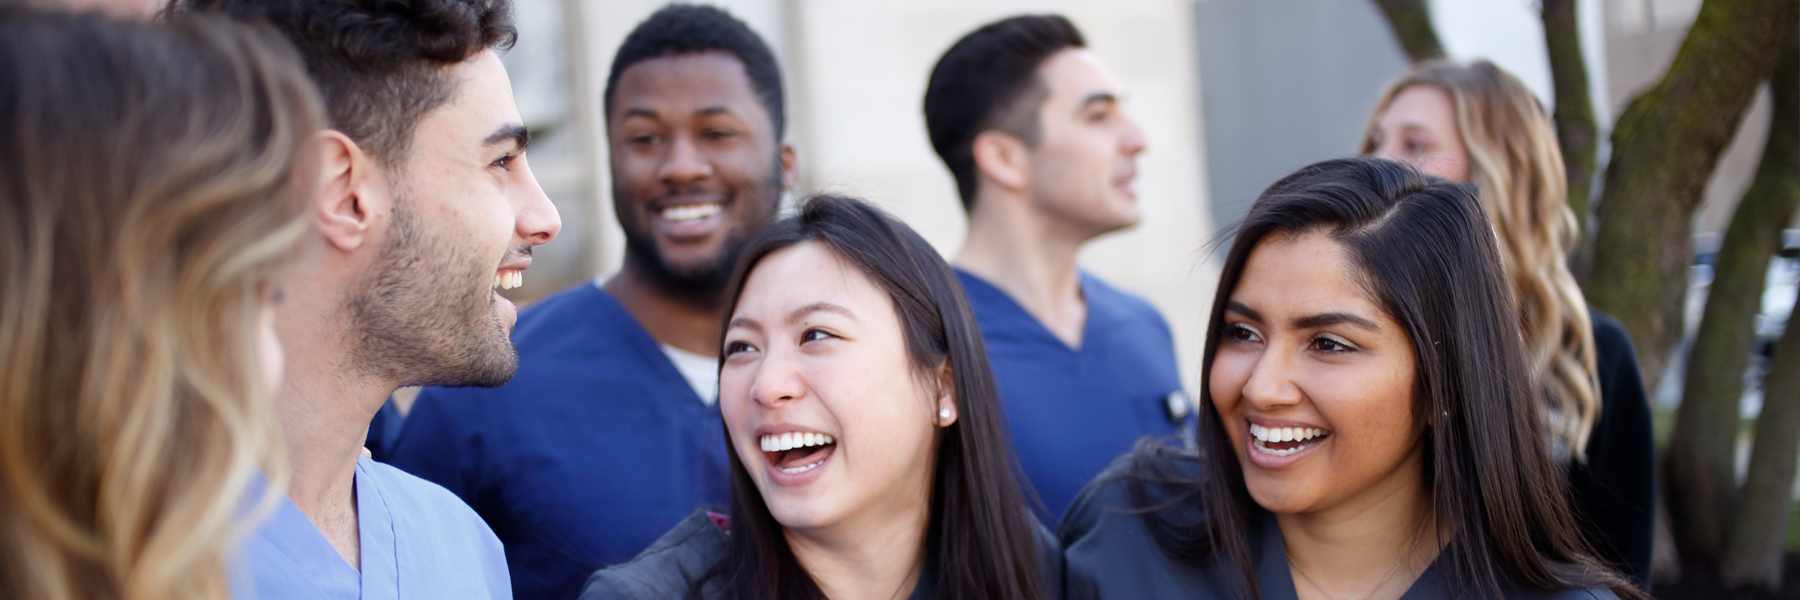 Dentistry students wear scrubs and smile at each other. 